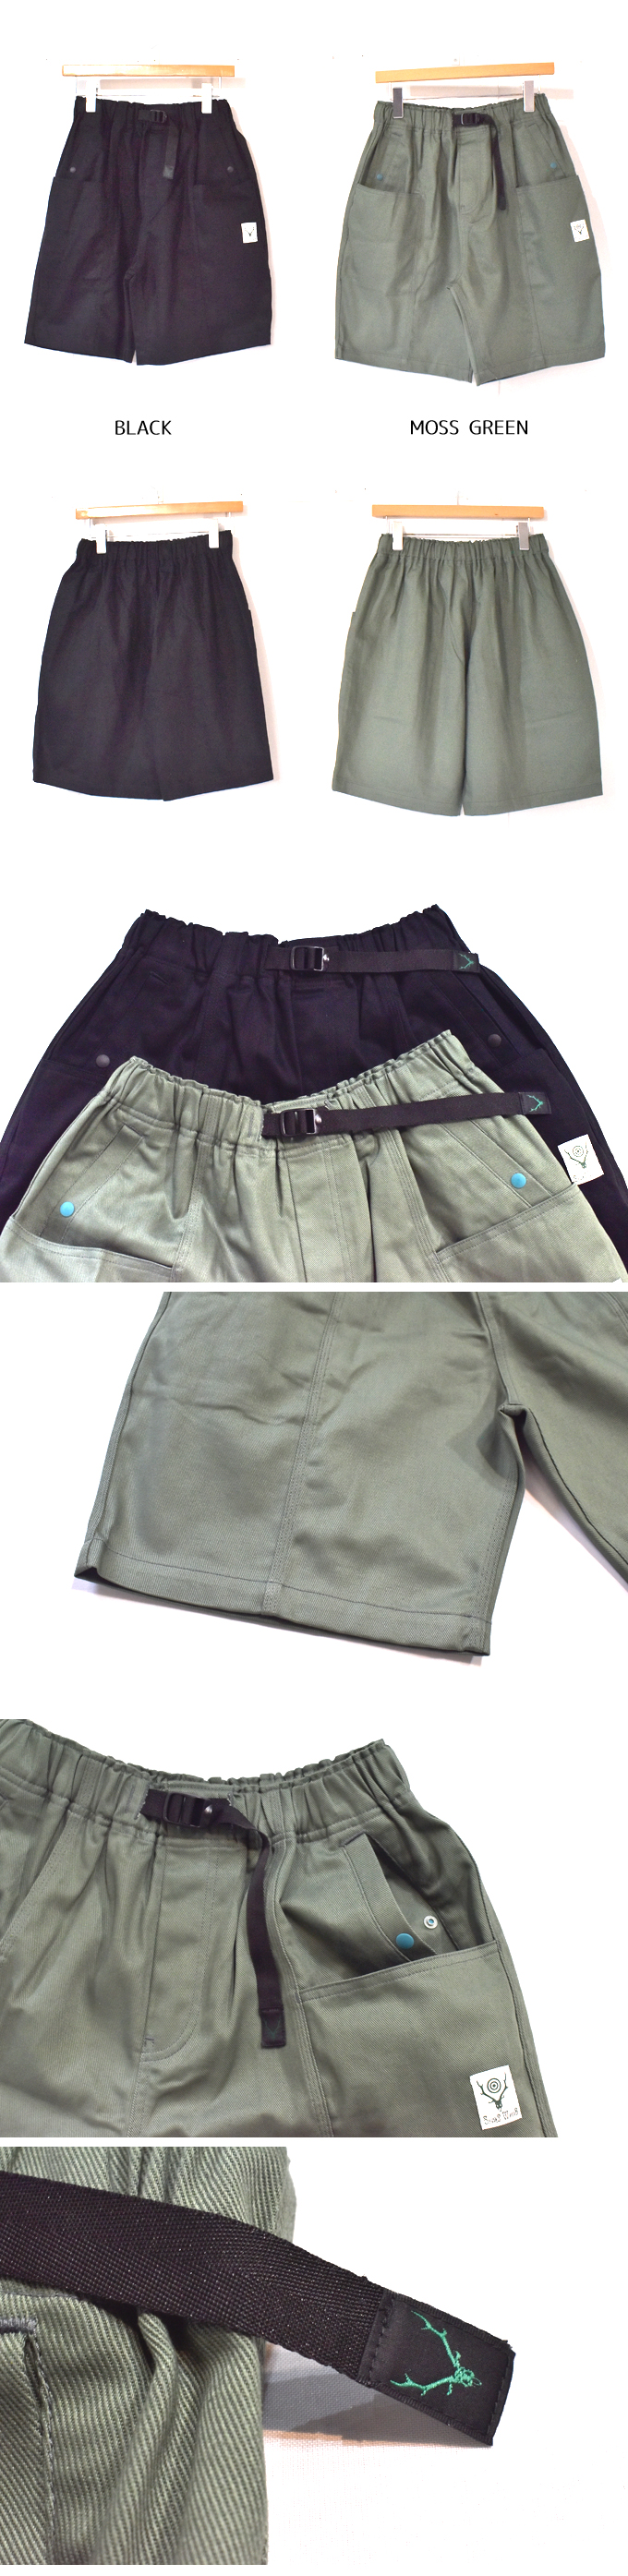 South2 West8 BELTED C.S. SHORT - COTTON TWILL